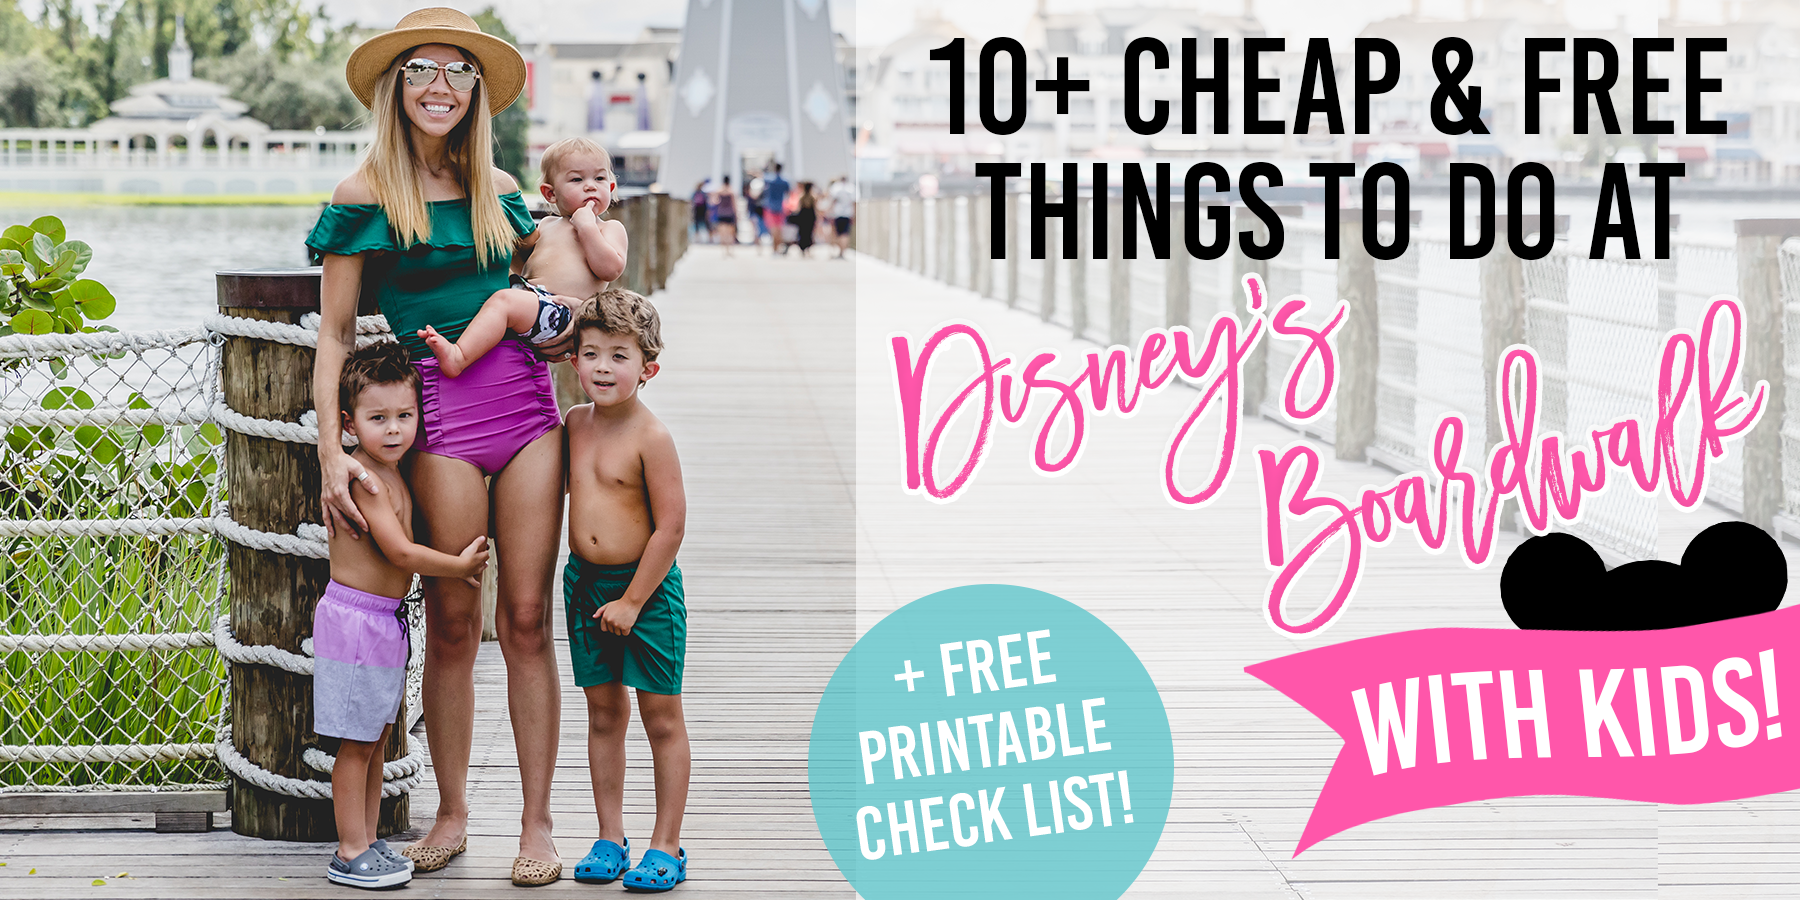 10+ Cheap or FREE Things To Do At Disney Boardwalk With Kids! | + FREE PRINTABLE CHECK LIST!!